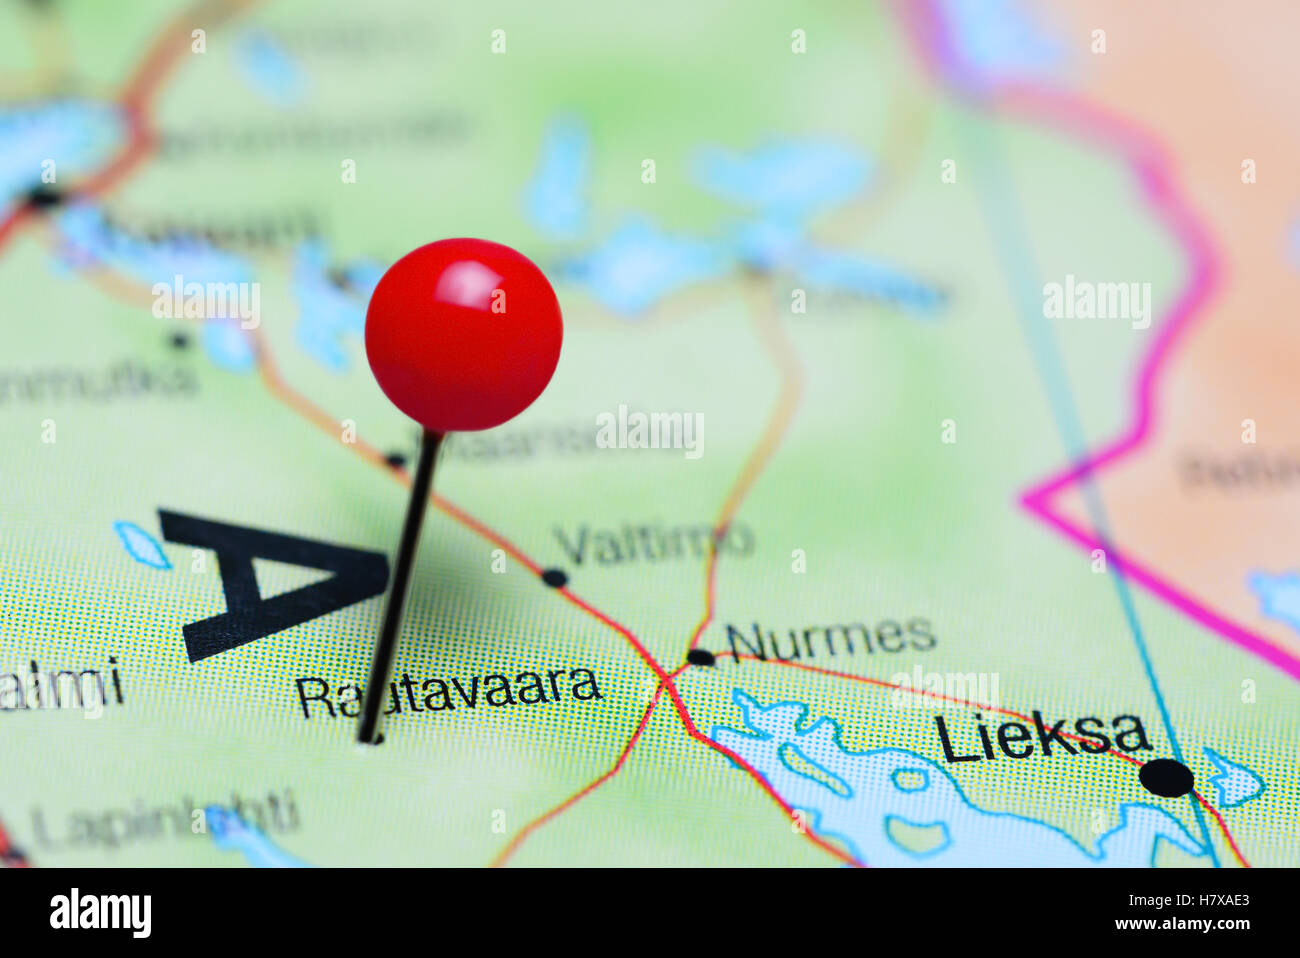 Rautavaara pinned on a map of Finland Stock Photo